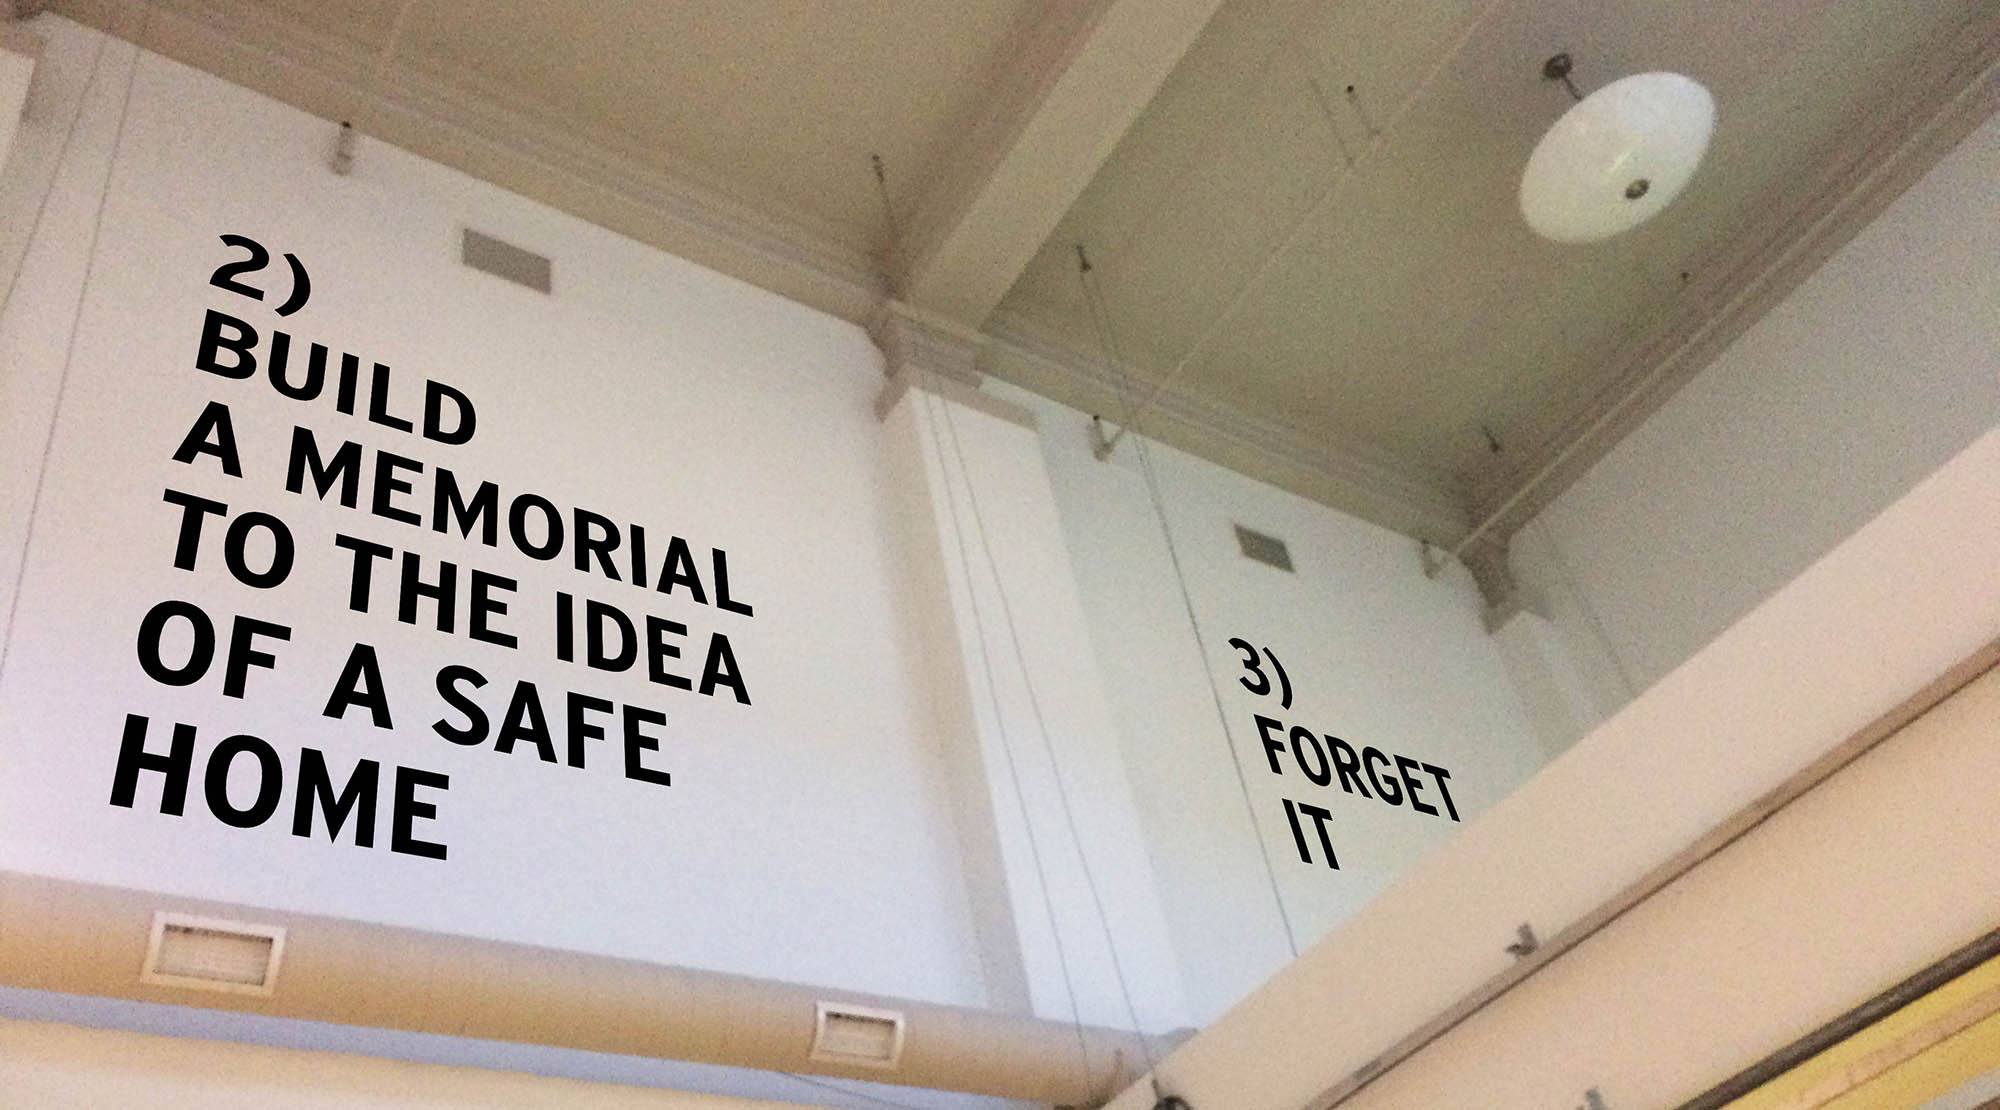 Text printed on a wall that reads "2) build a memorial to the idea of a safe home 3) forget it"